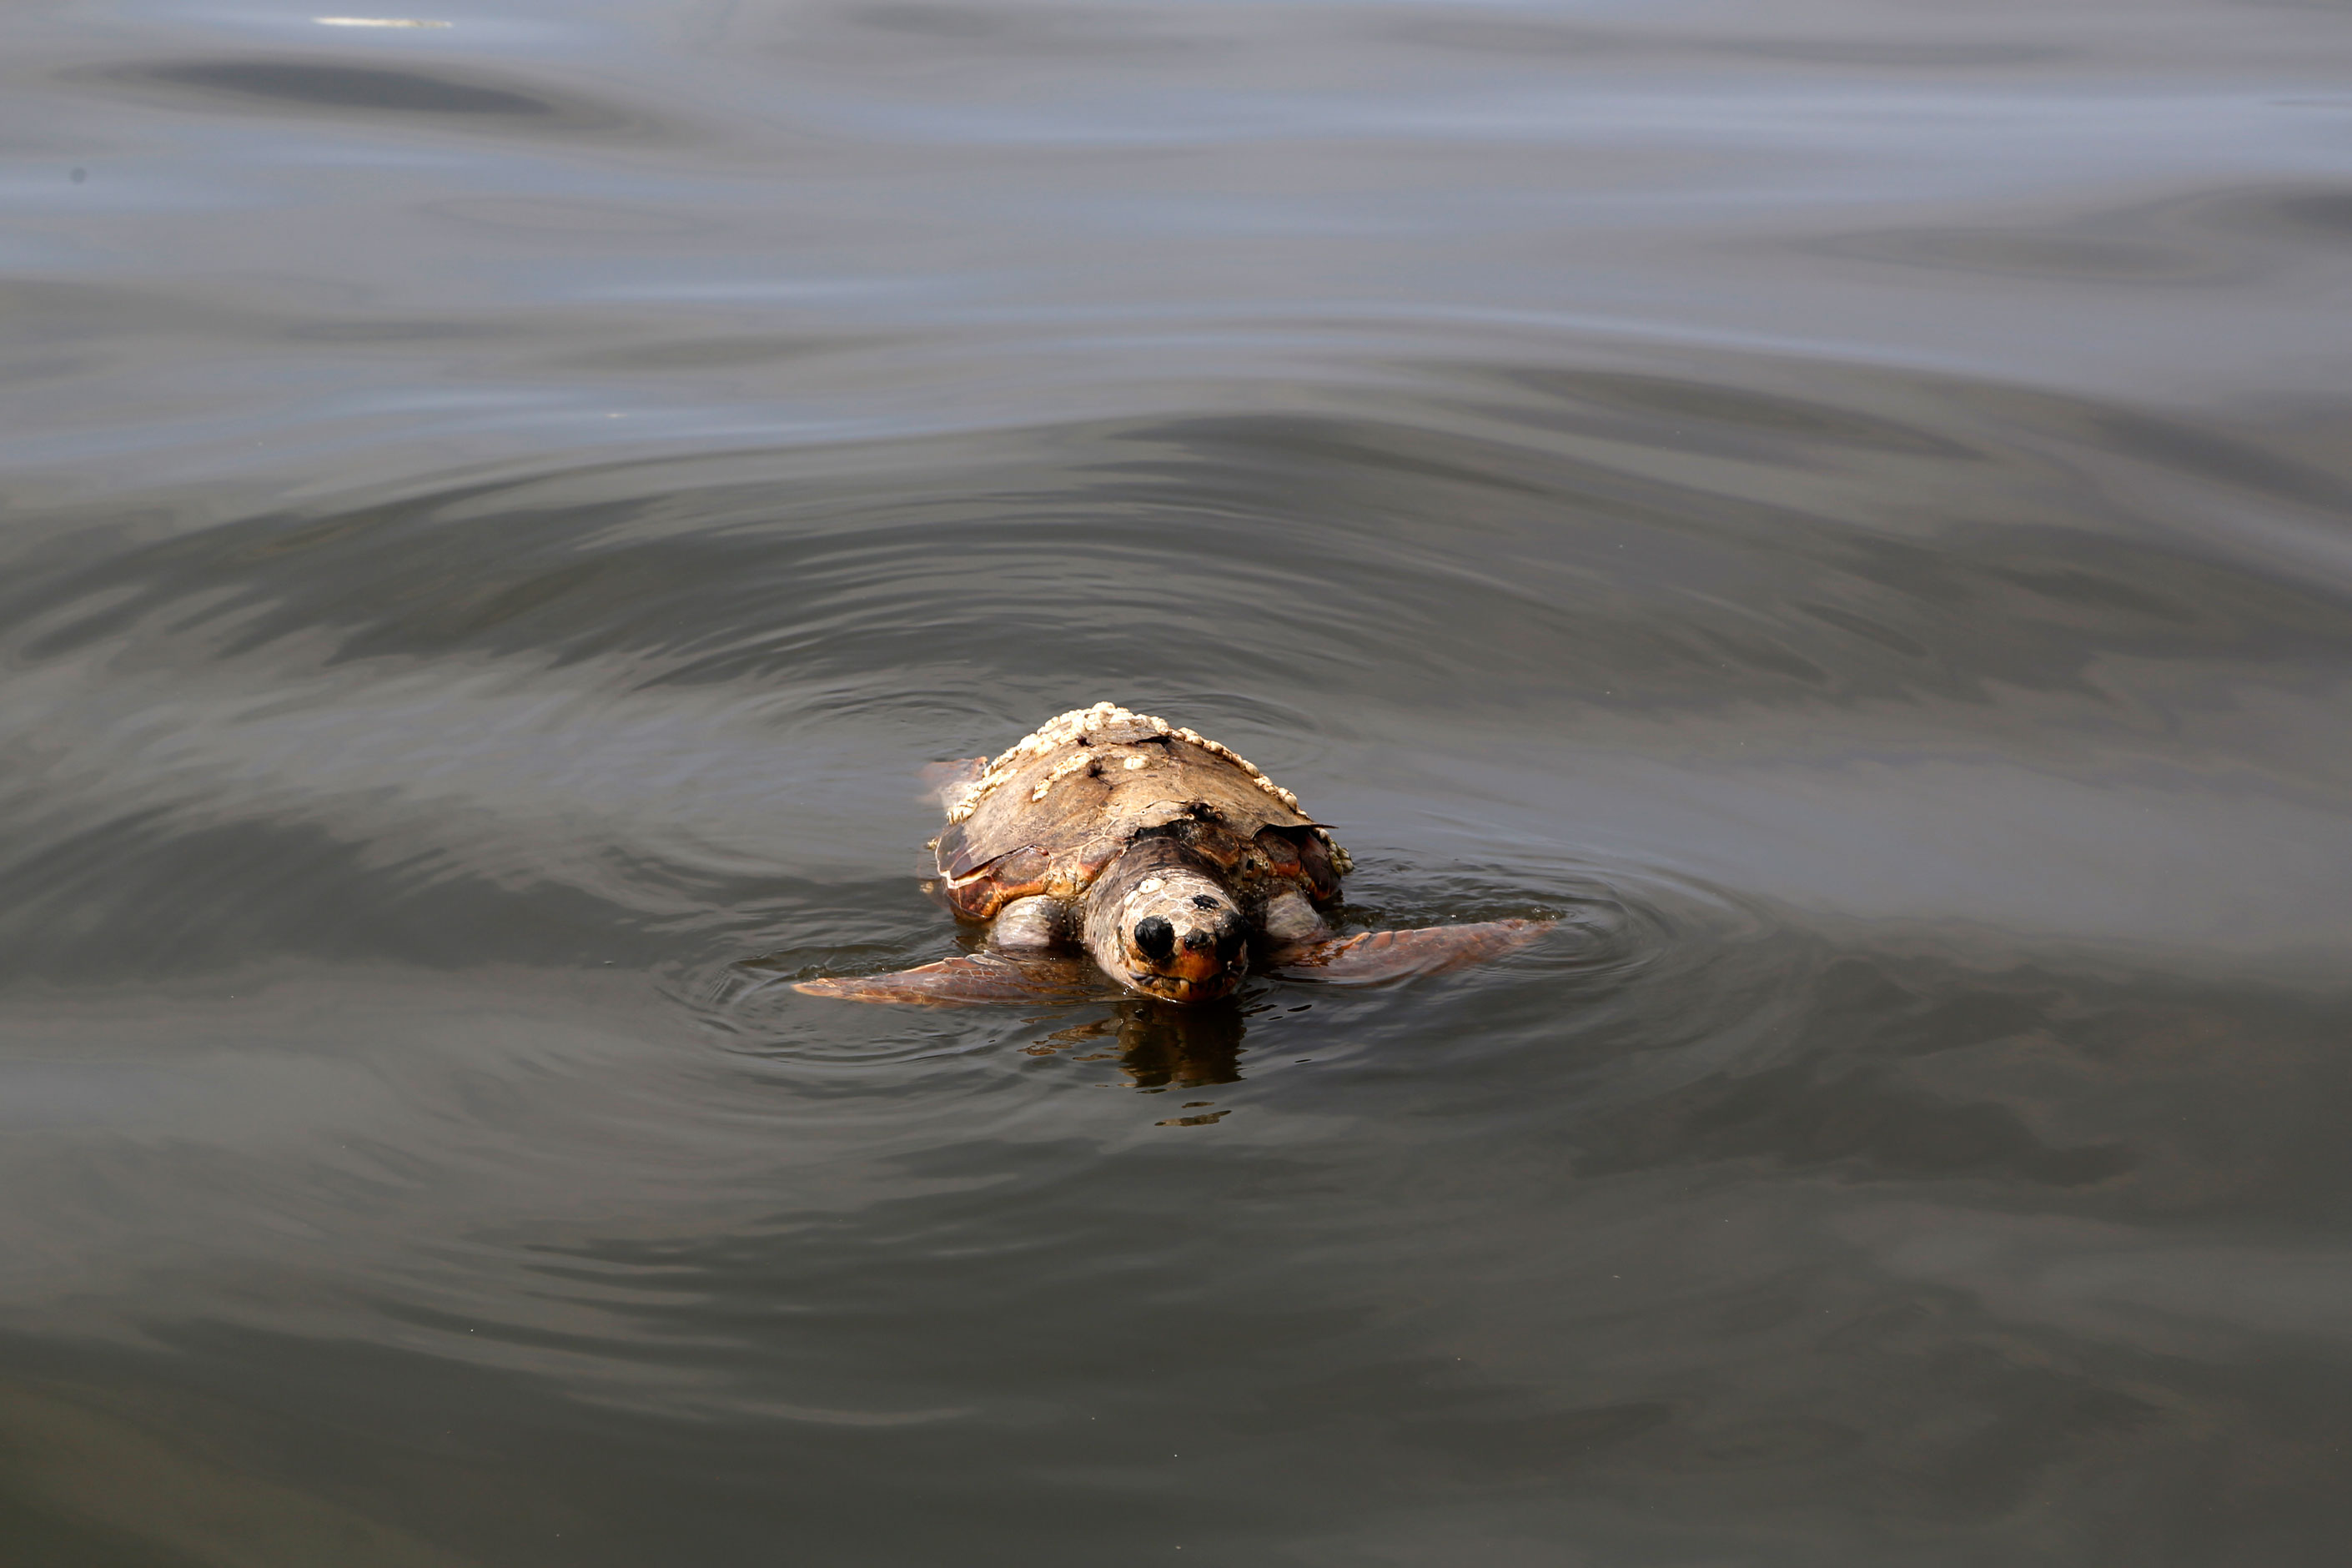 A dead sea turtle floating in the water near the Bourj Hammoud landfill and dumping site.